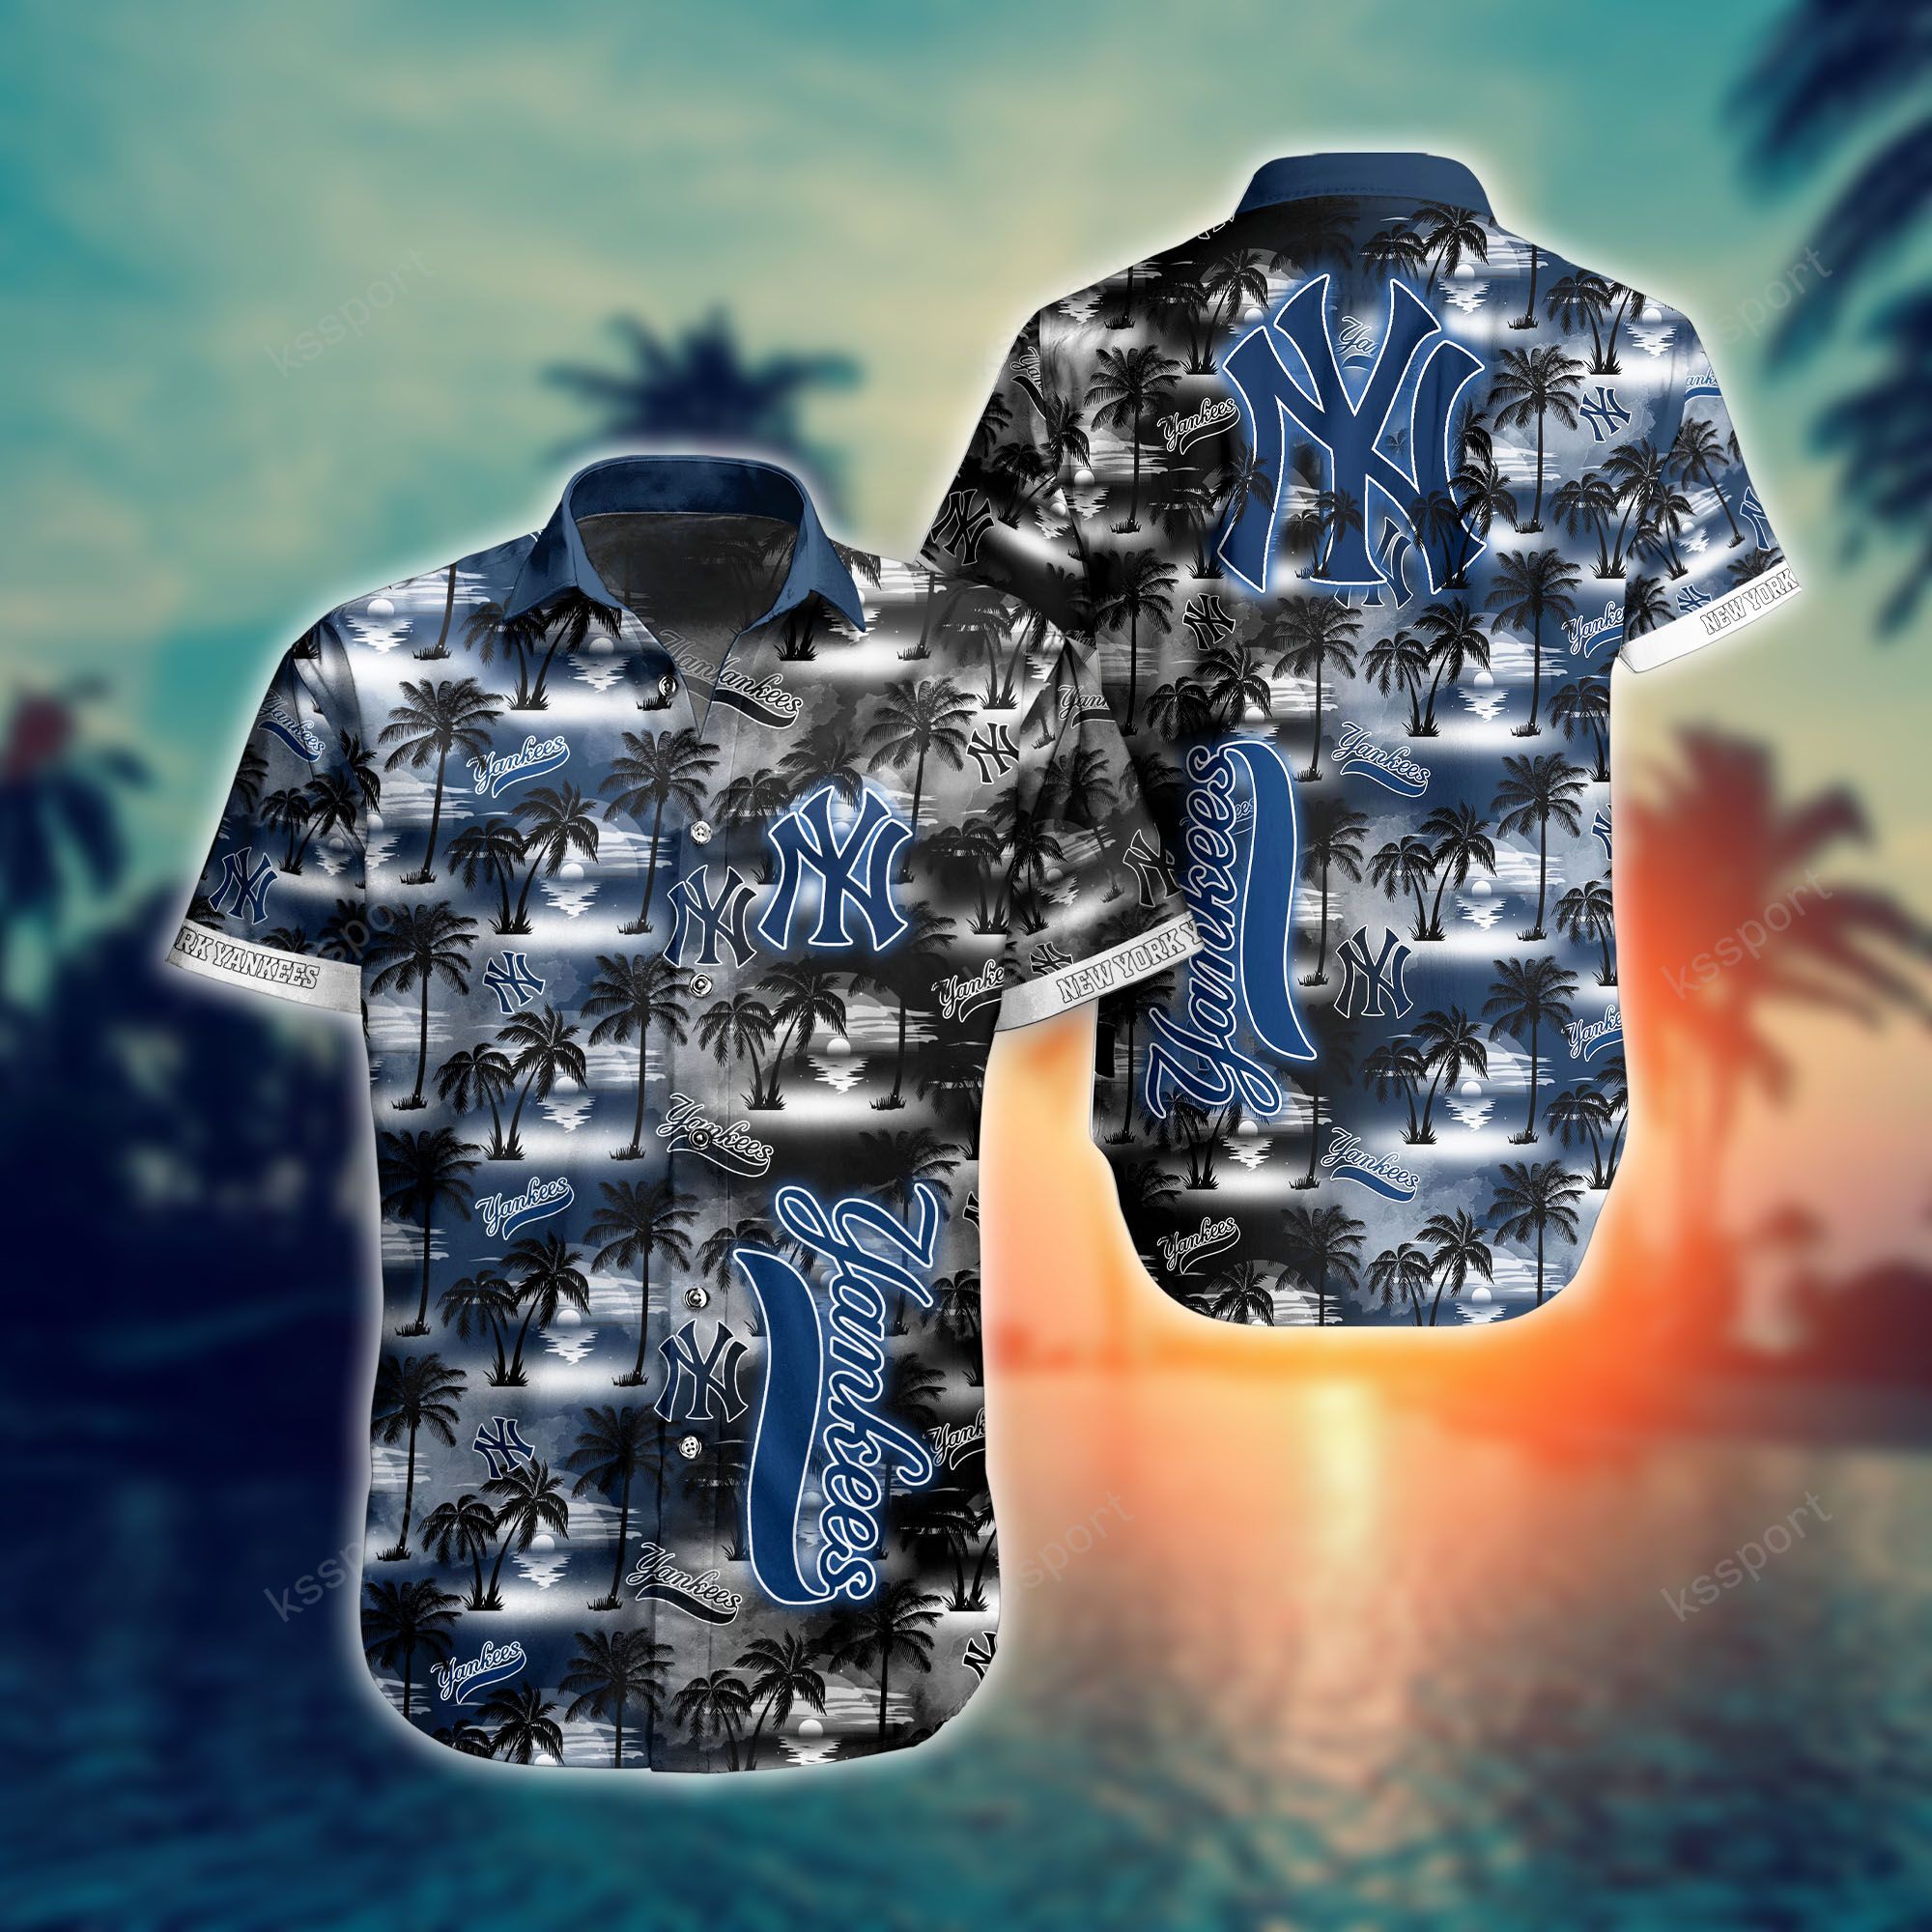 Treat yourself to a cool Hawaiian set today! 134